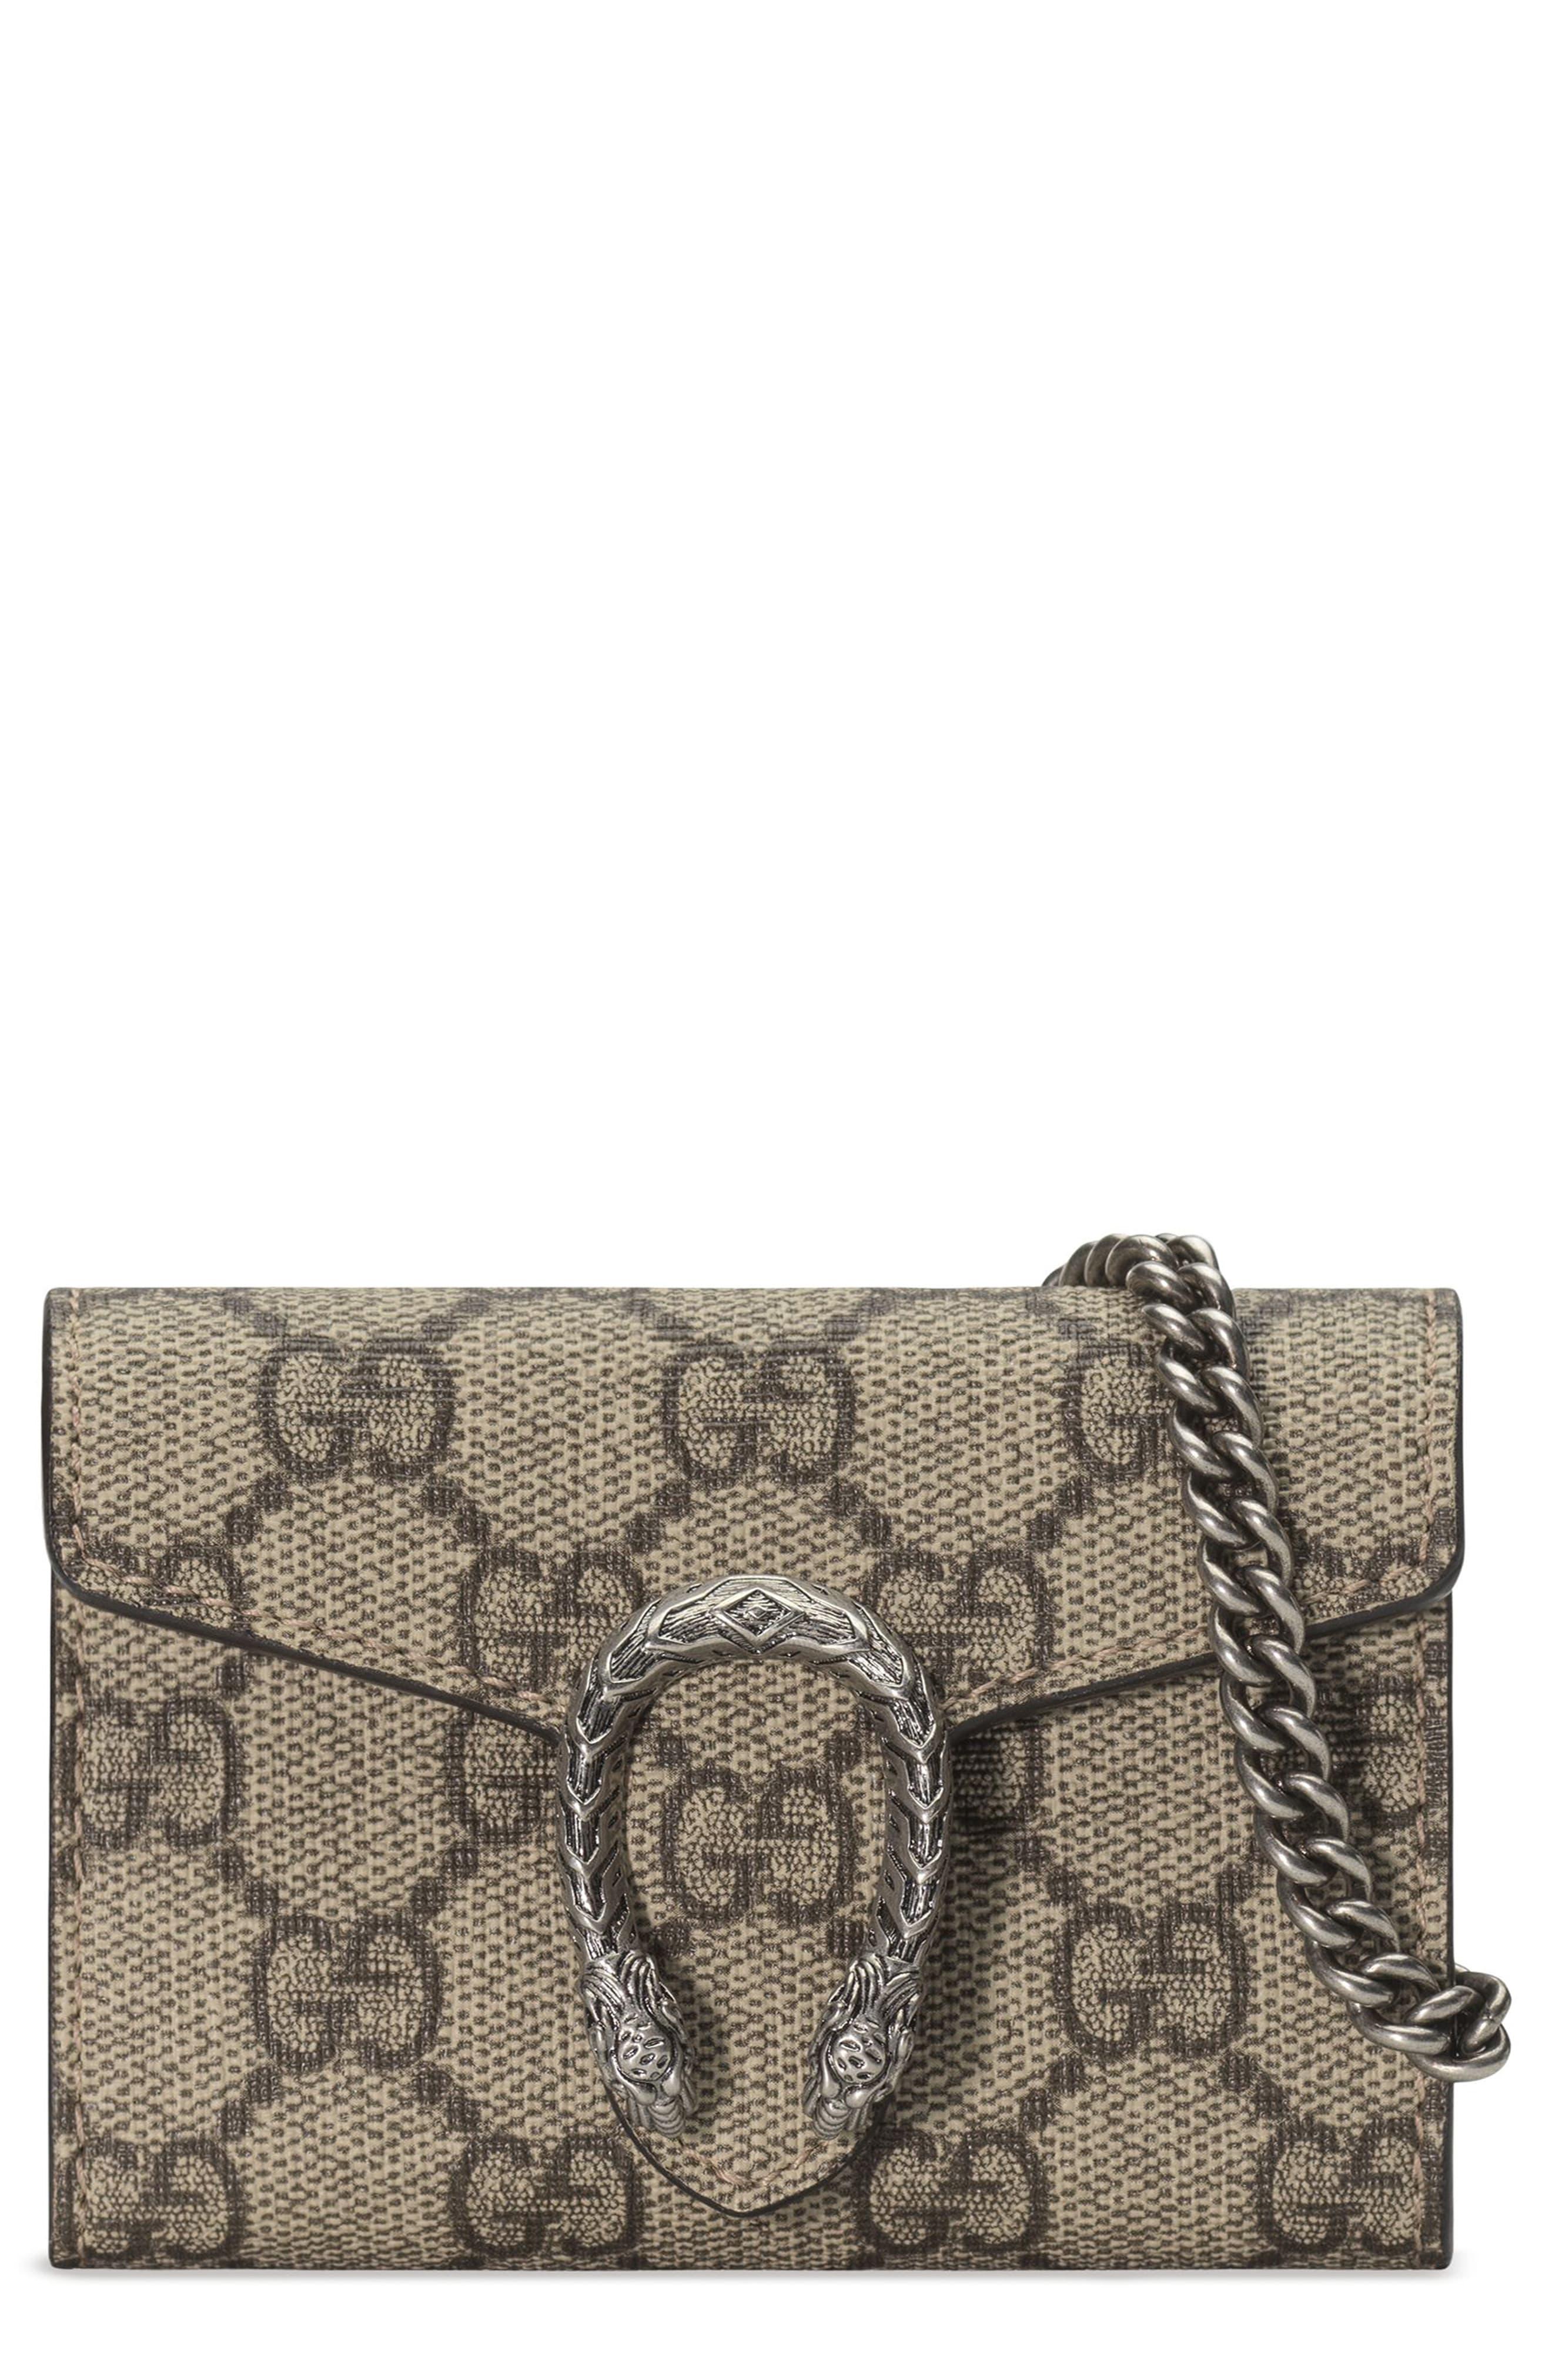 Gucci GG Supreme Dionysus Wallet on Chain Bag (SHF-6kyJO9) – LuxeDH